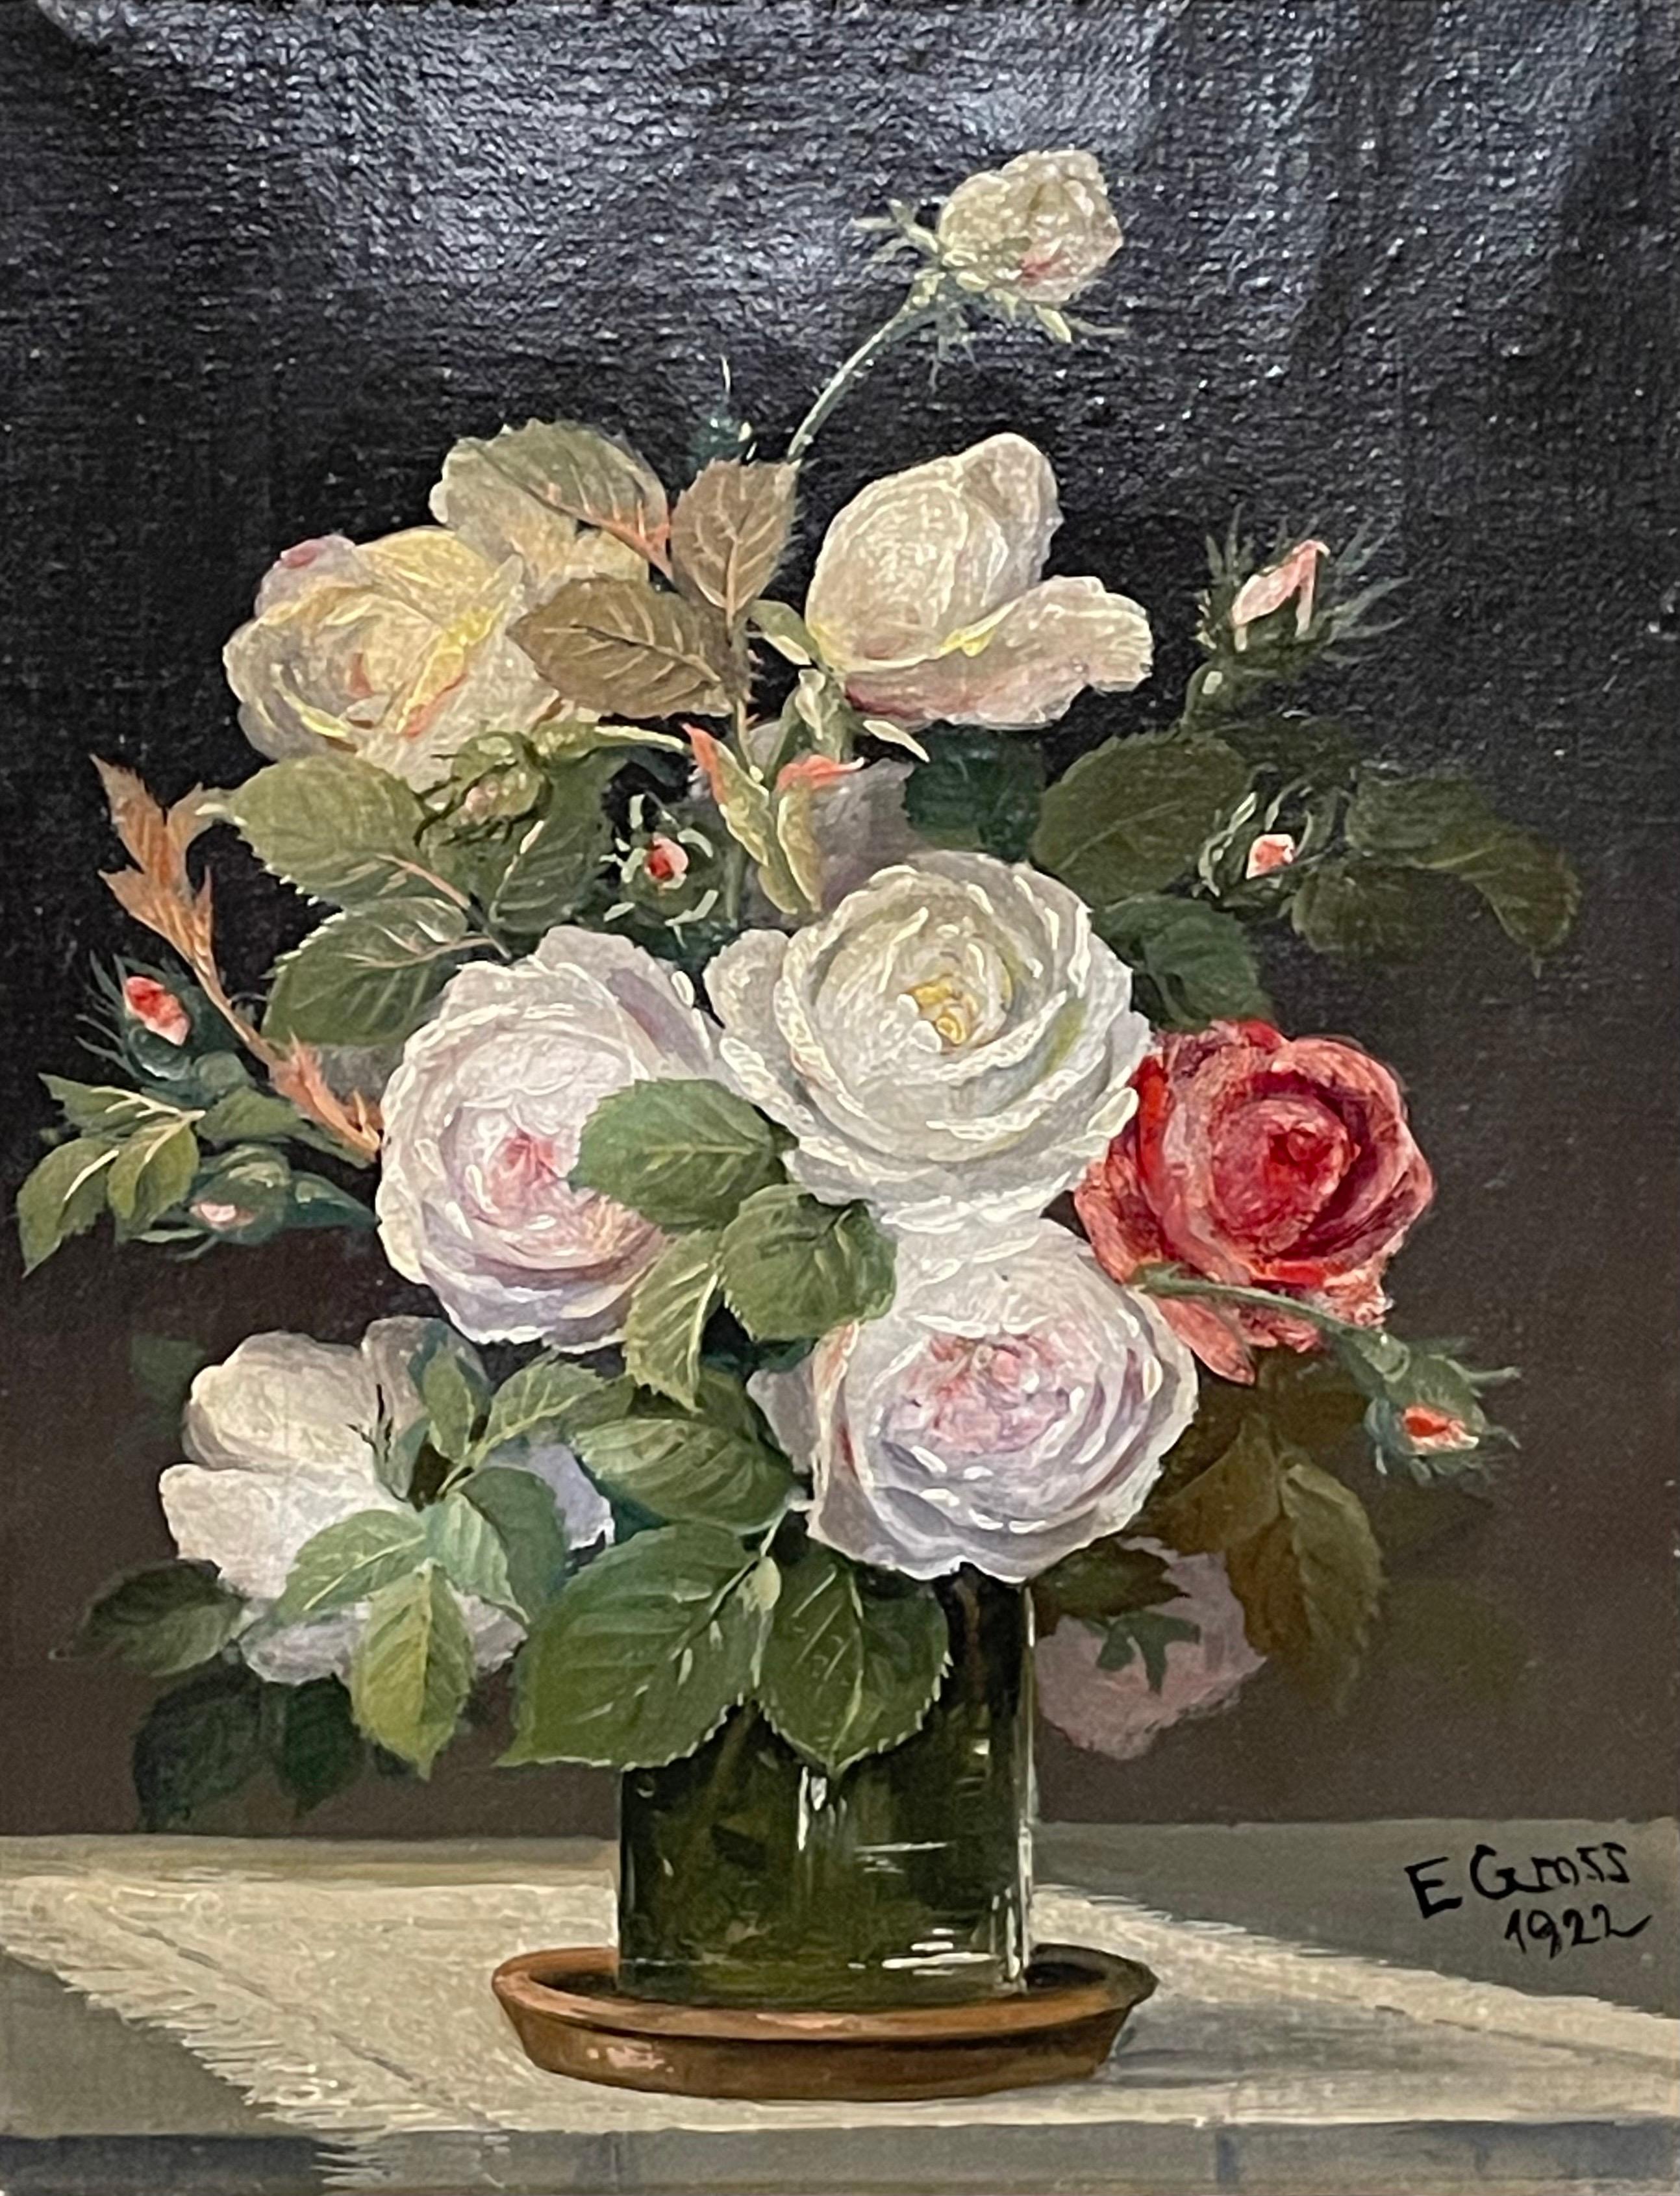 This is an original Danish oil on canvas still life flower painting from 1922 by E. Gross.

It is signed by the artist in the bottom right corner and is framed in a beautiful gold painted solid wood frame.

The painting is in good vintage condition